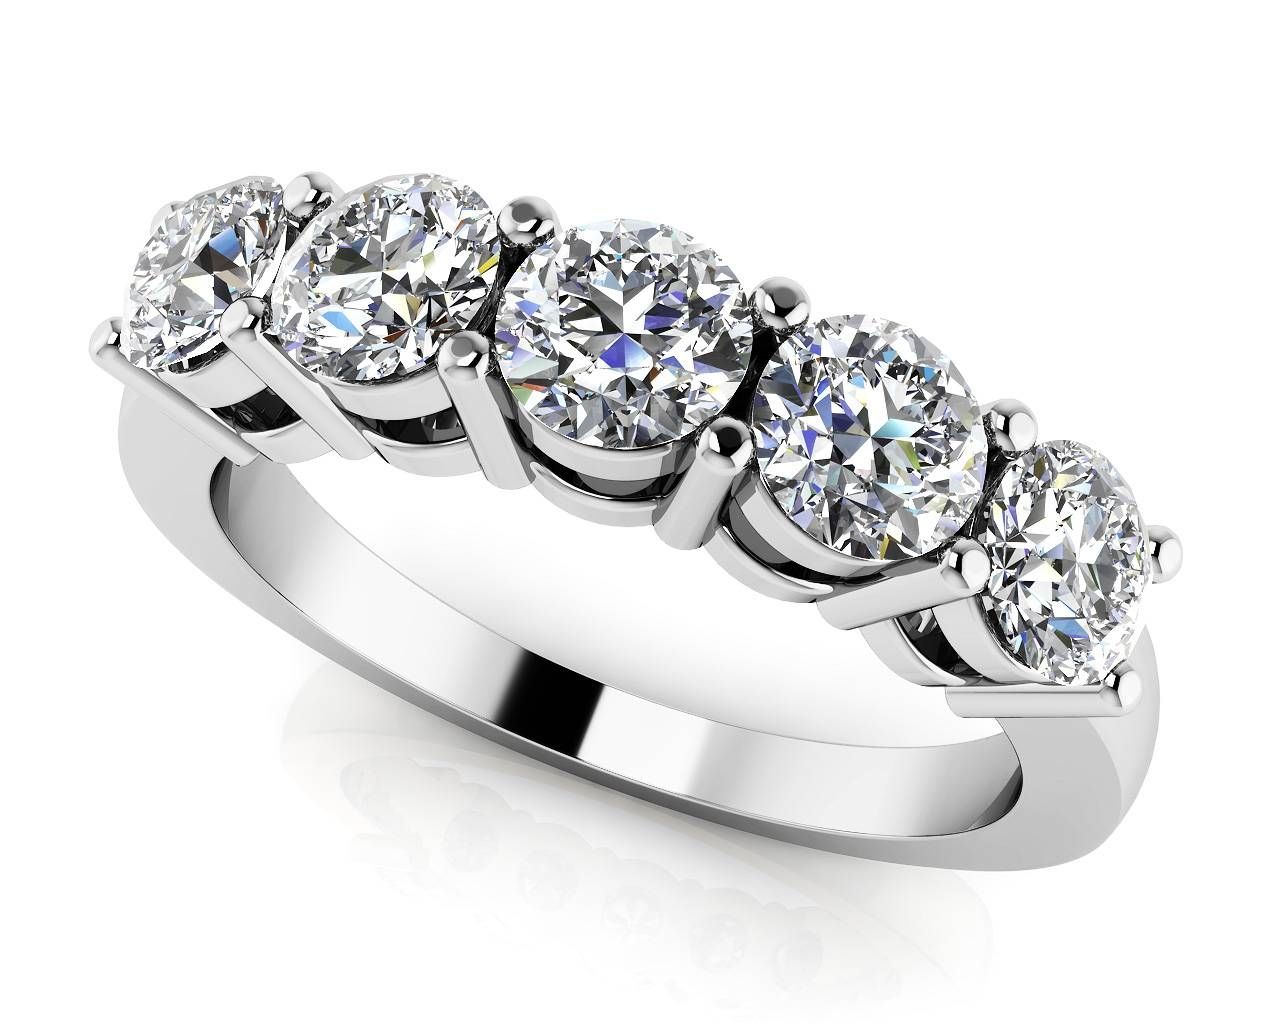 Design Your Own Diamond Anniversary Ring & Eternity Ring For Recent Modern Anniversary Rings (View 12 of 25)